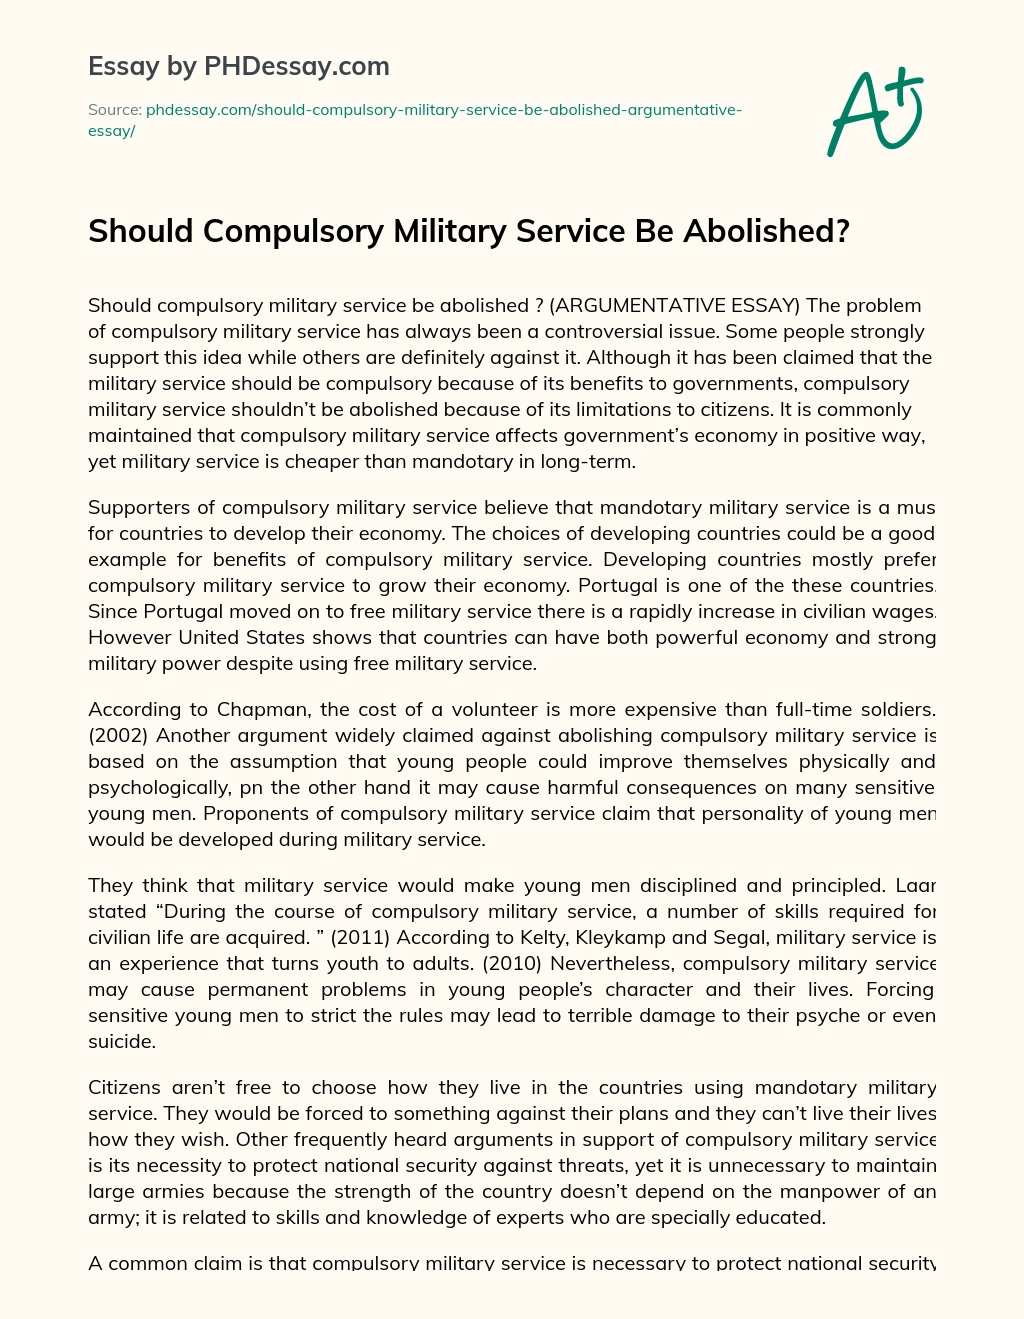 Should Compulsory Military Service Be Abolished? essay